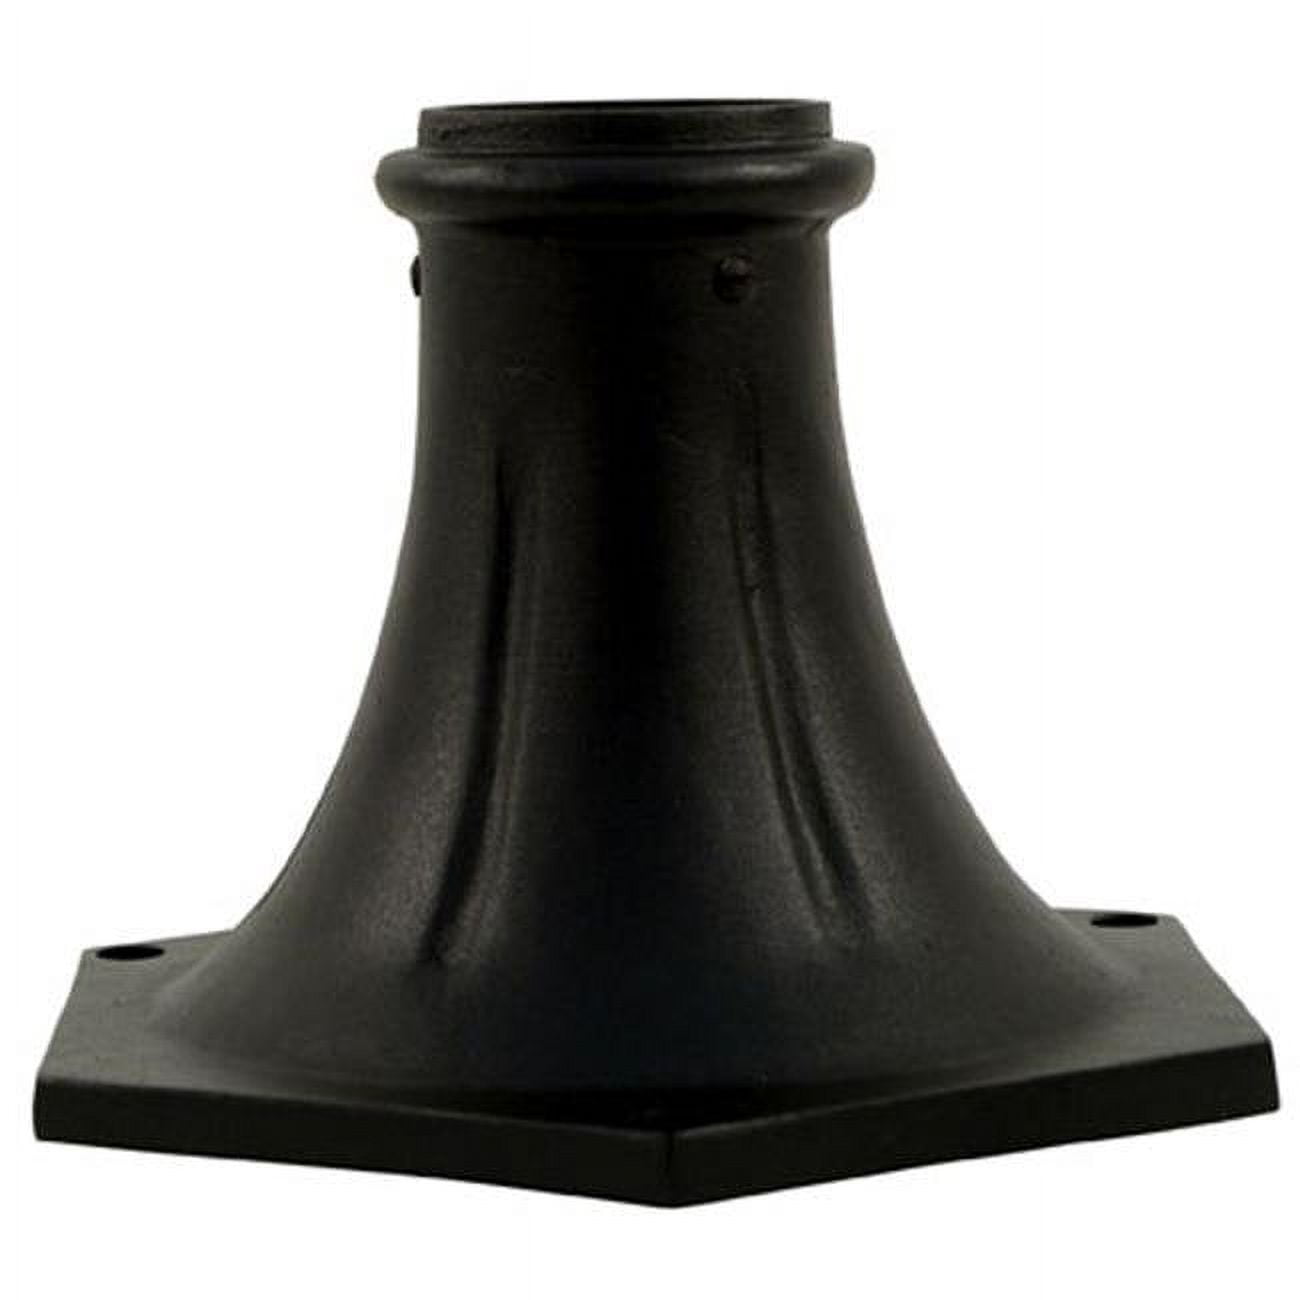 Bs300-b Surface Mounted Base For 3 In. Outer Dia Round Post, Black - 8 X 11.63 X 11.63 In.